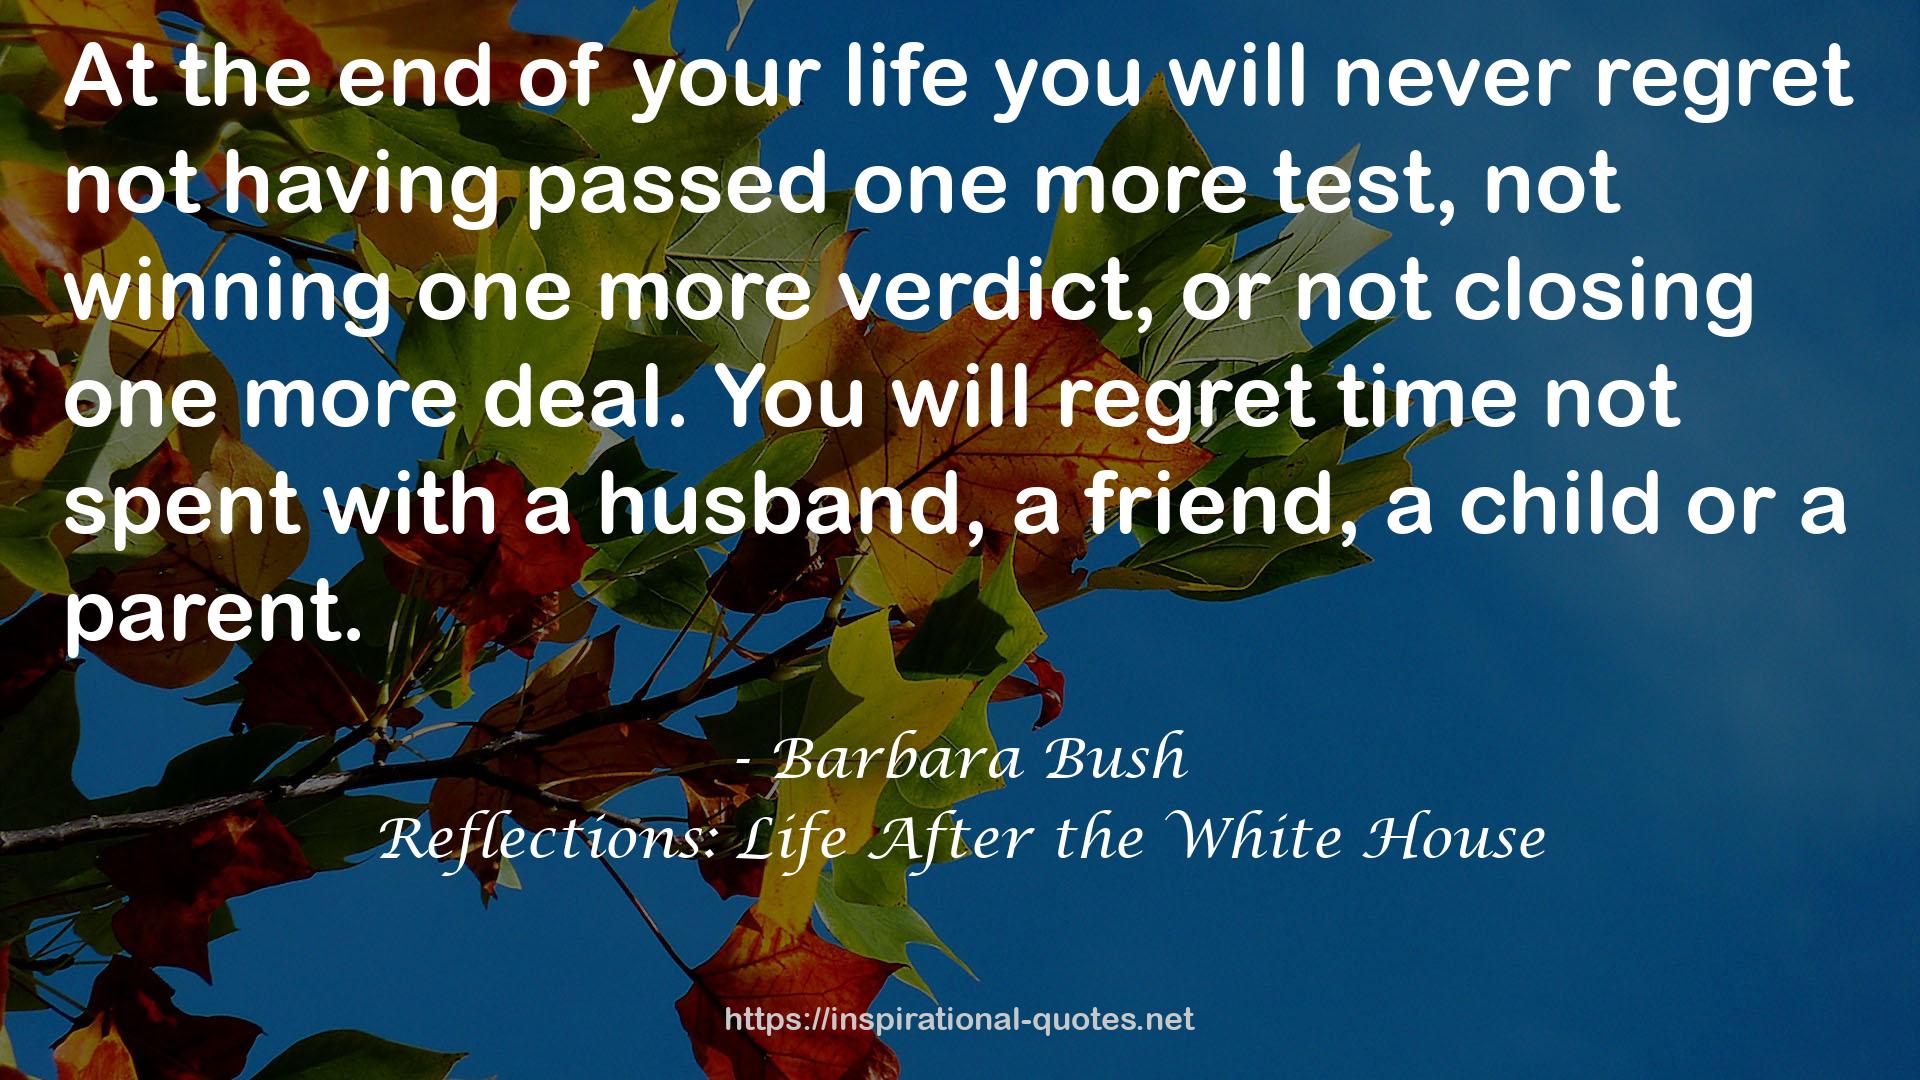 Reflections: Life After the White House QUOTES